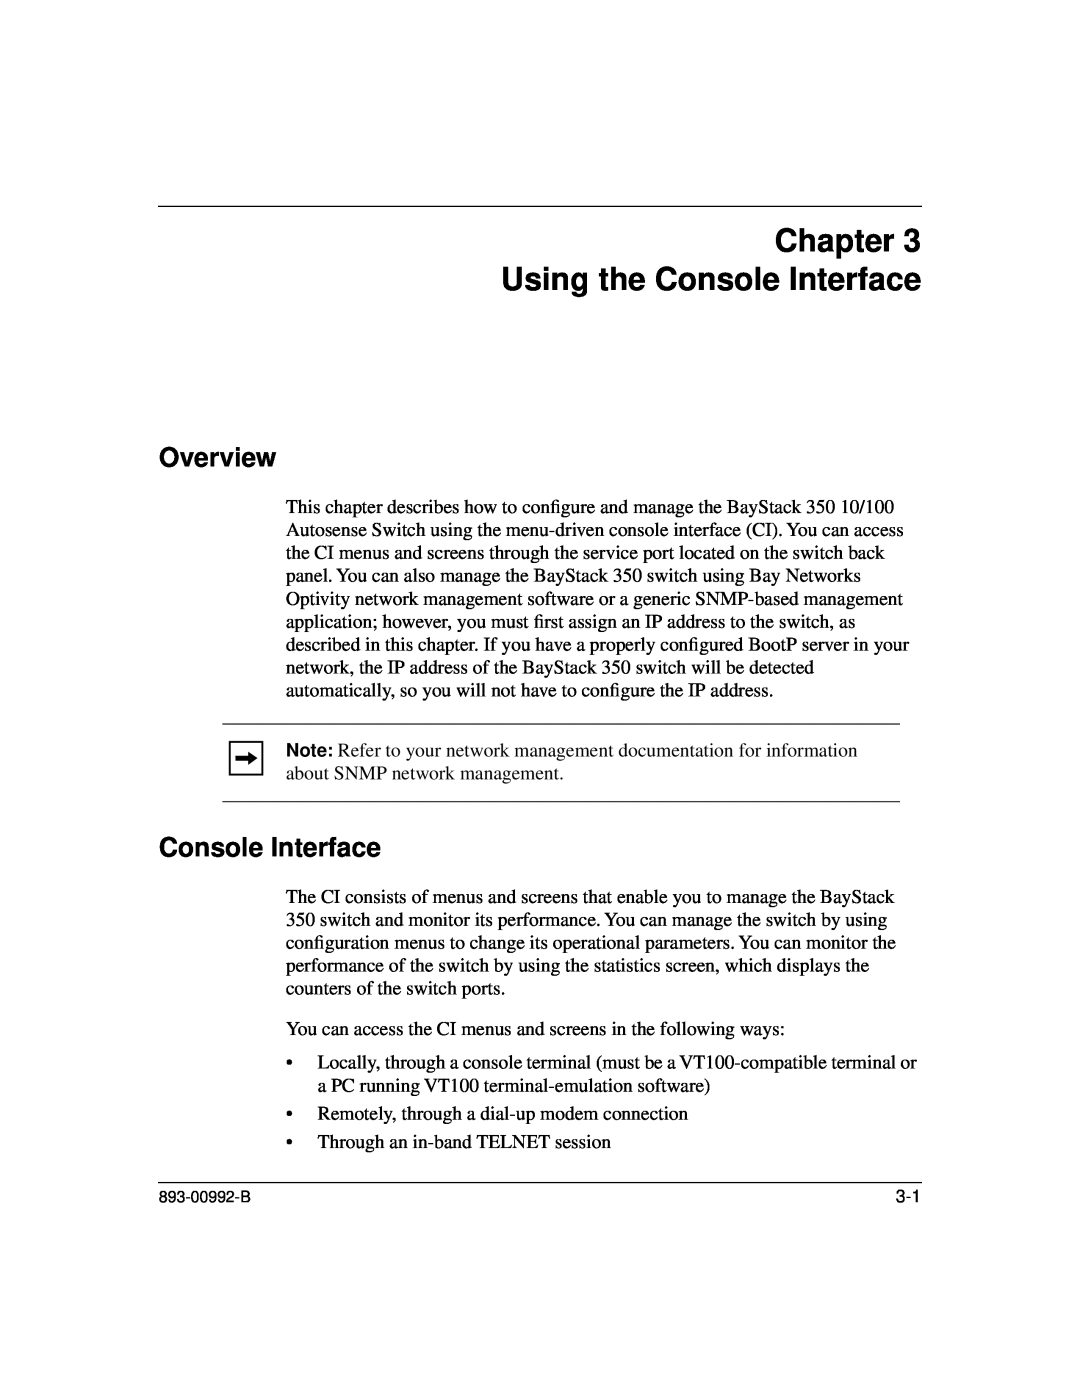 Bay Technical Associates 350 manual Chapter Using the Console Interface, Overview 